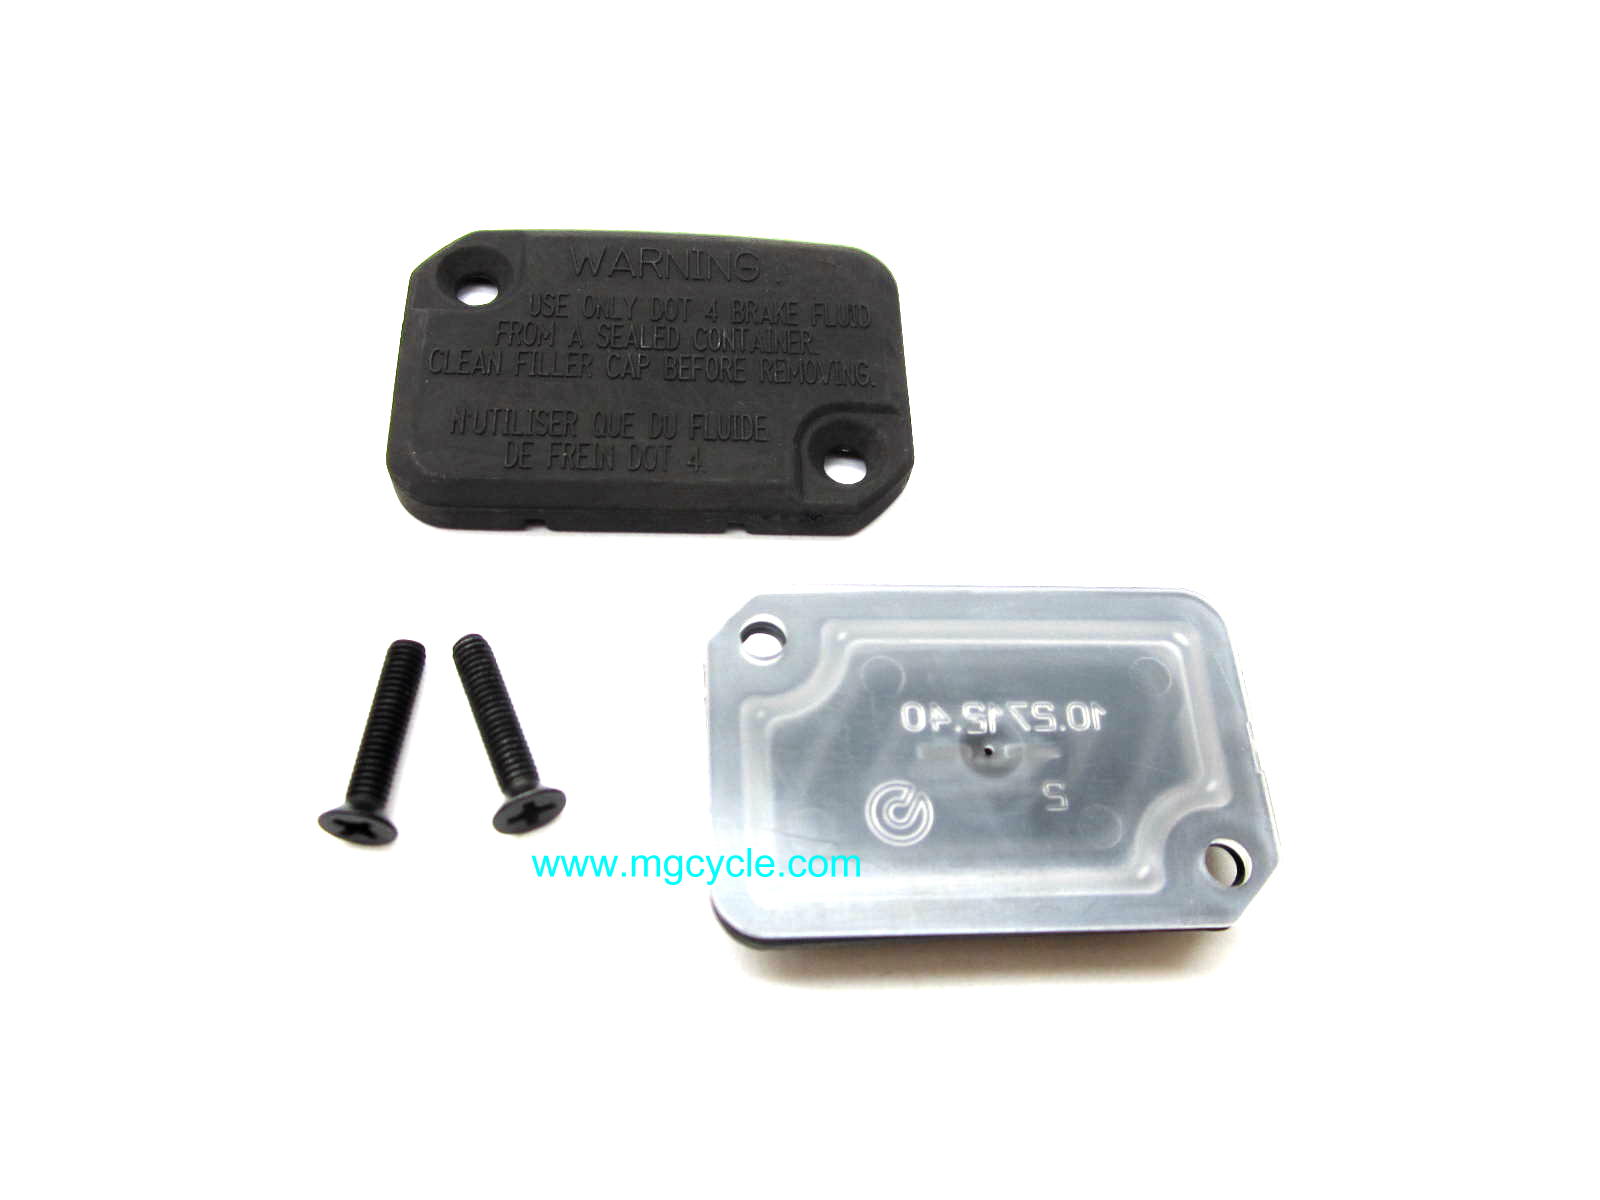 Brembo master cylinder lid kit for many 2001 and later models - Click Image to Close